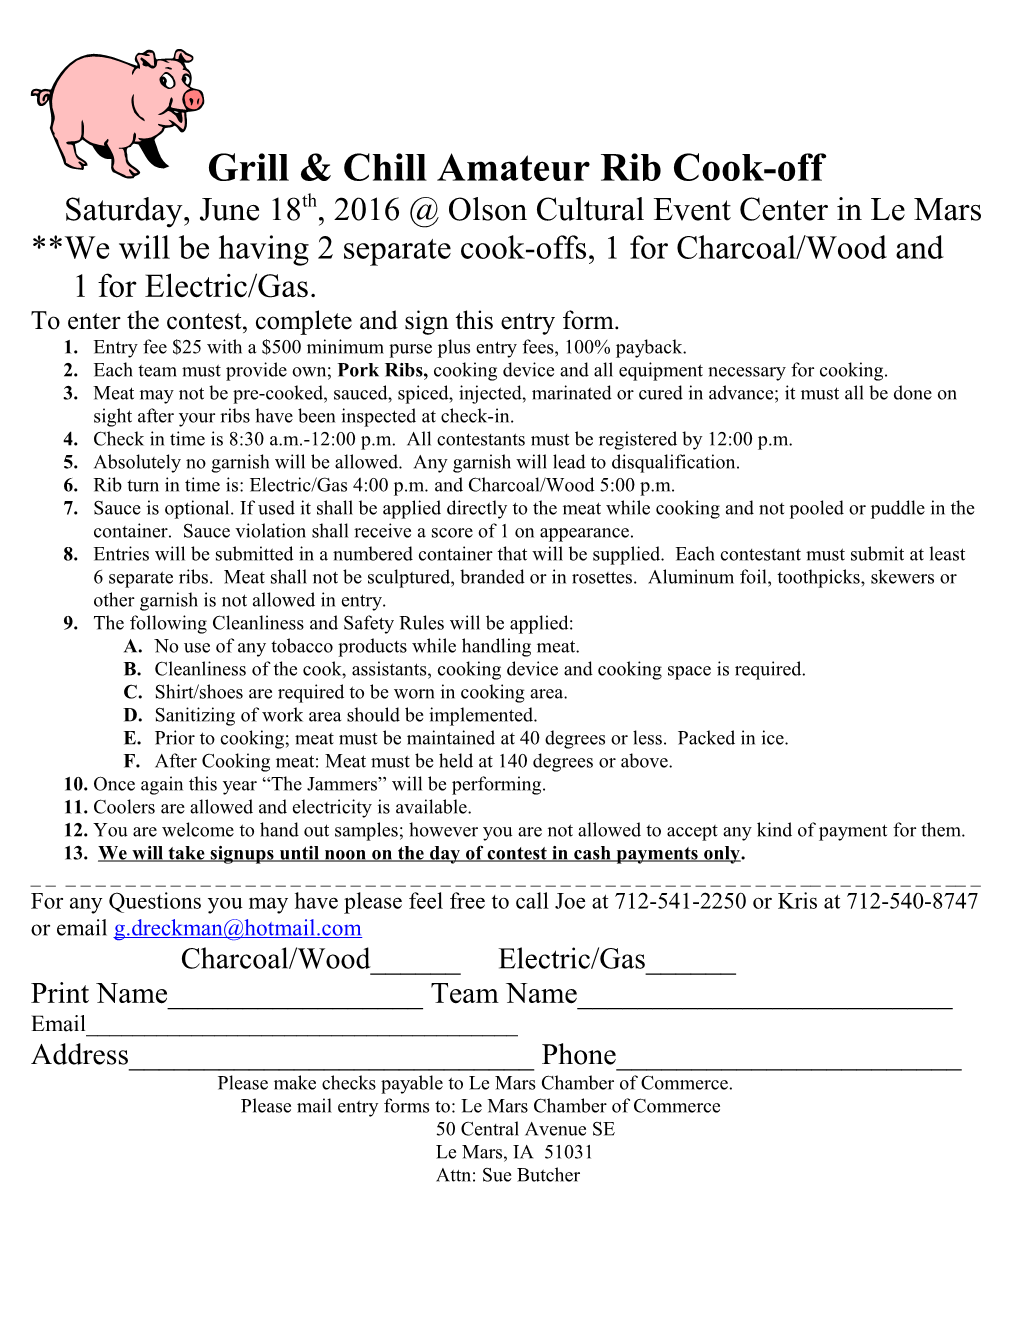 Grill & Chill Amateur Rib Cook-Off